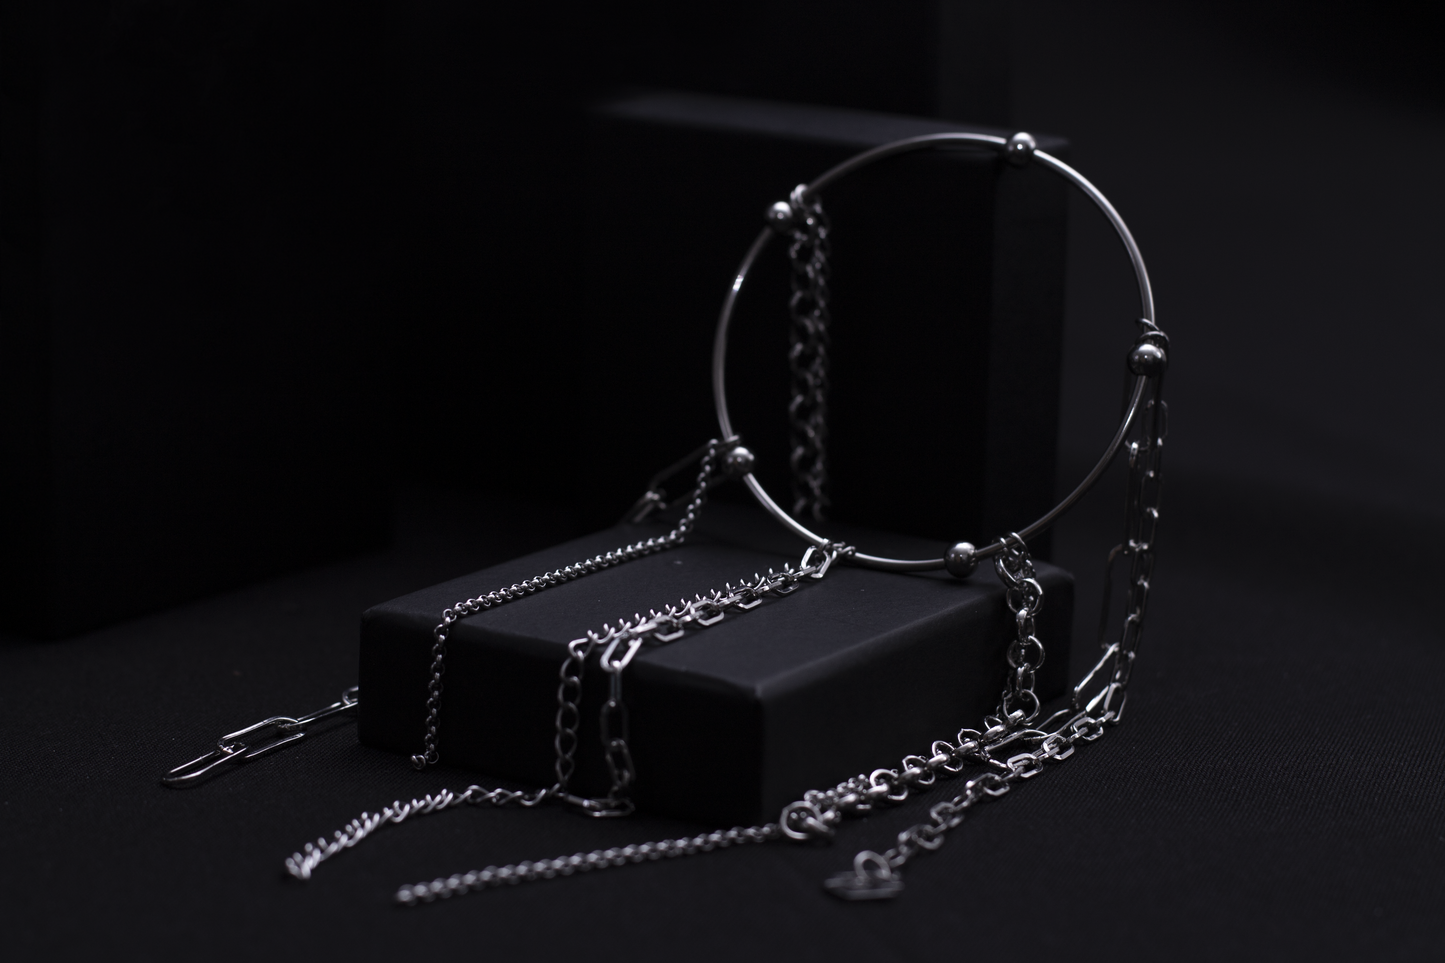 levate your gothic wardrobe with Myril Jewels' rigid bracelet adorned with delicate chains, embodying a darkly elegant neo-goth aesthetic, perfect for everyday wear or as a striking statement piece.